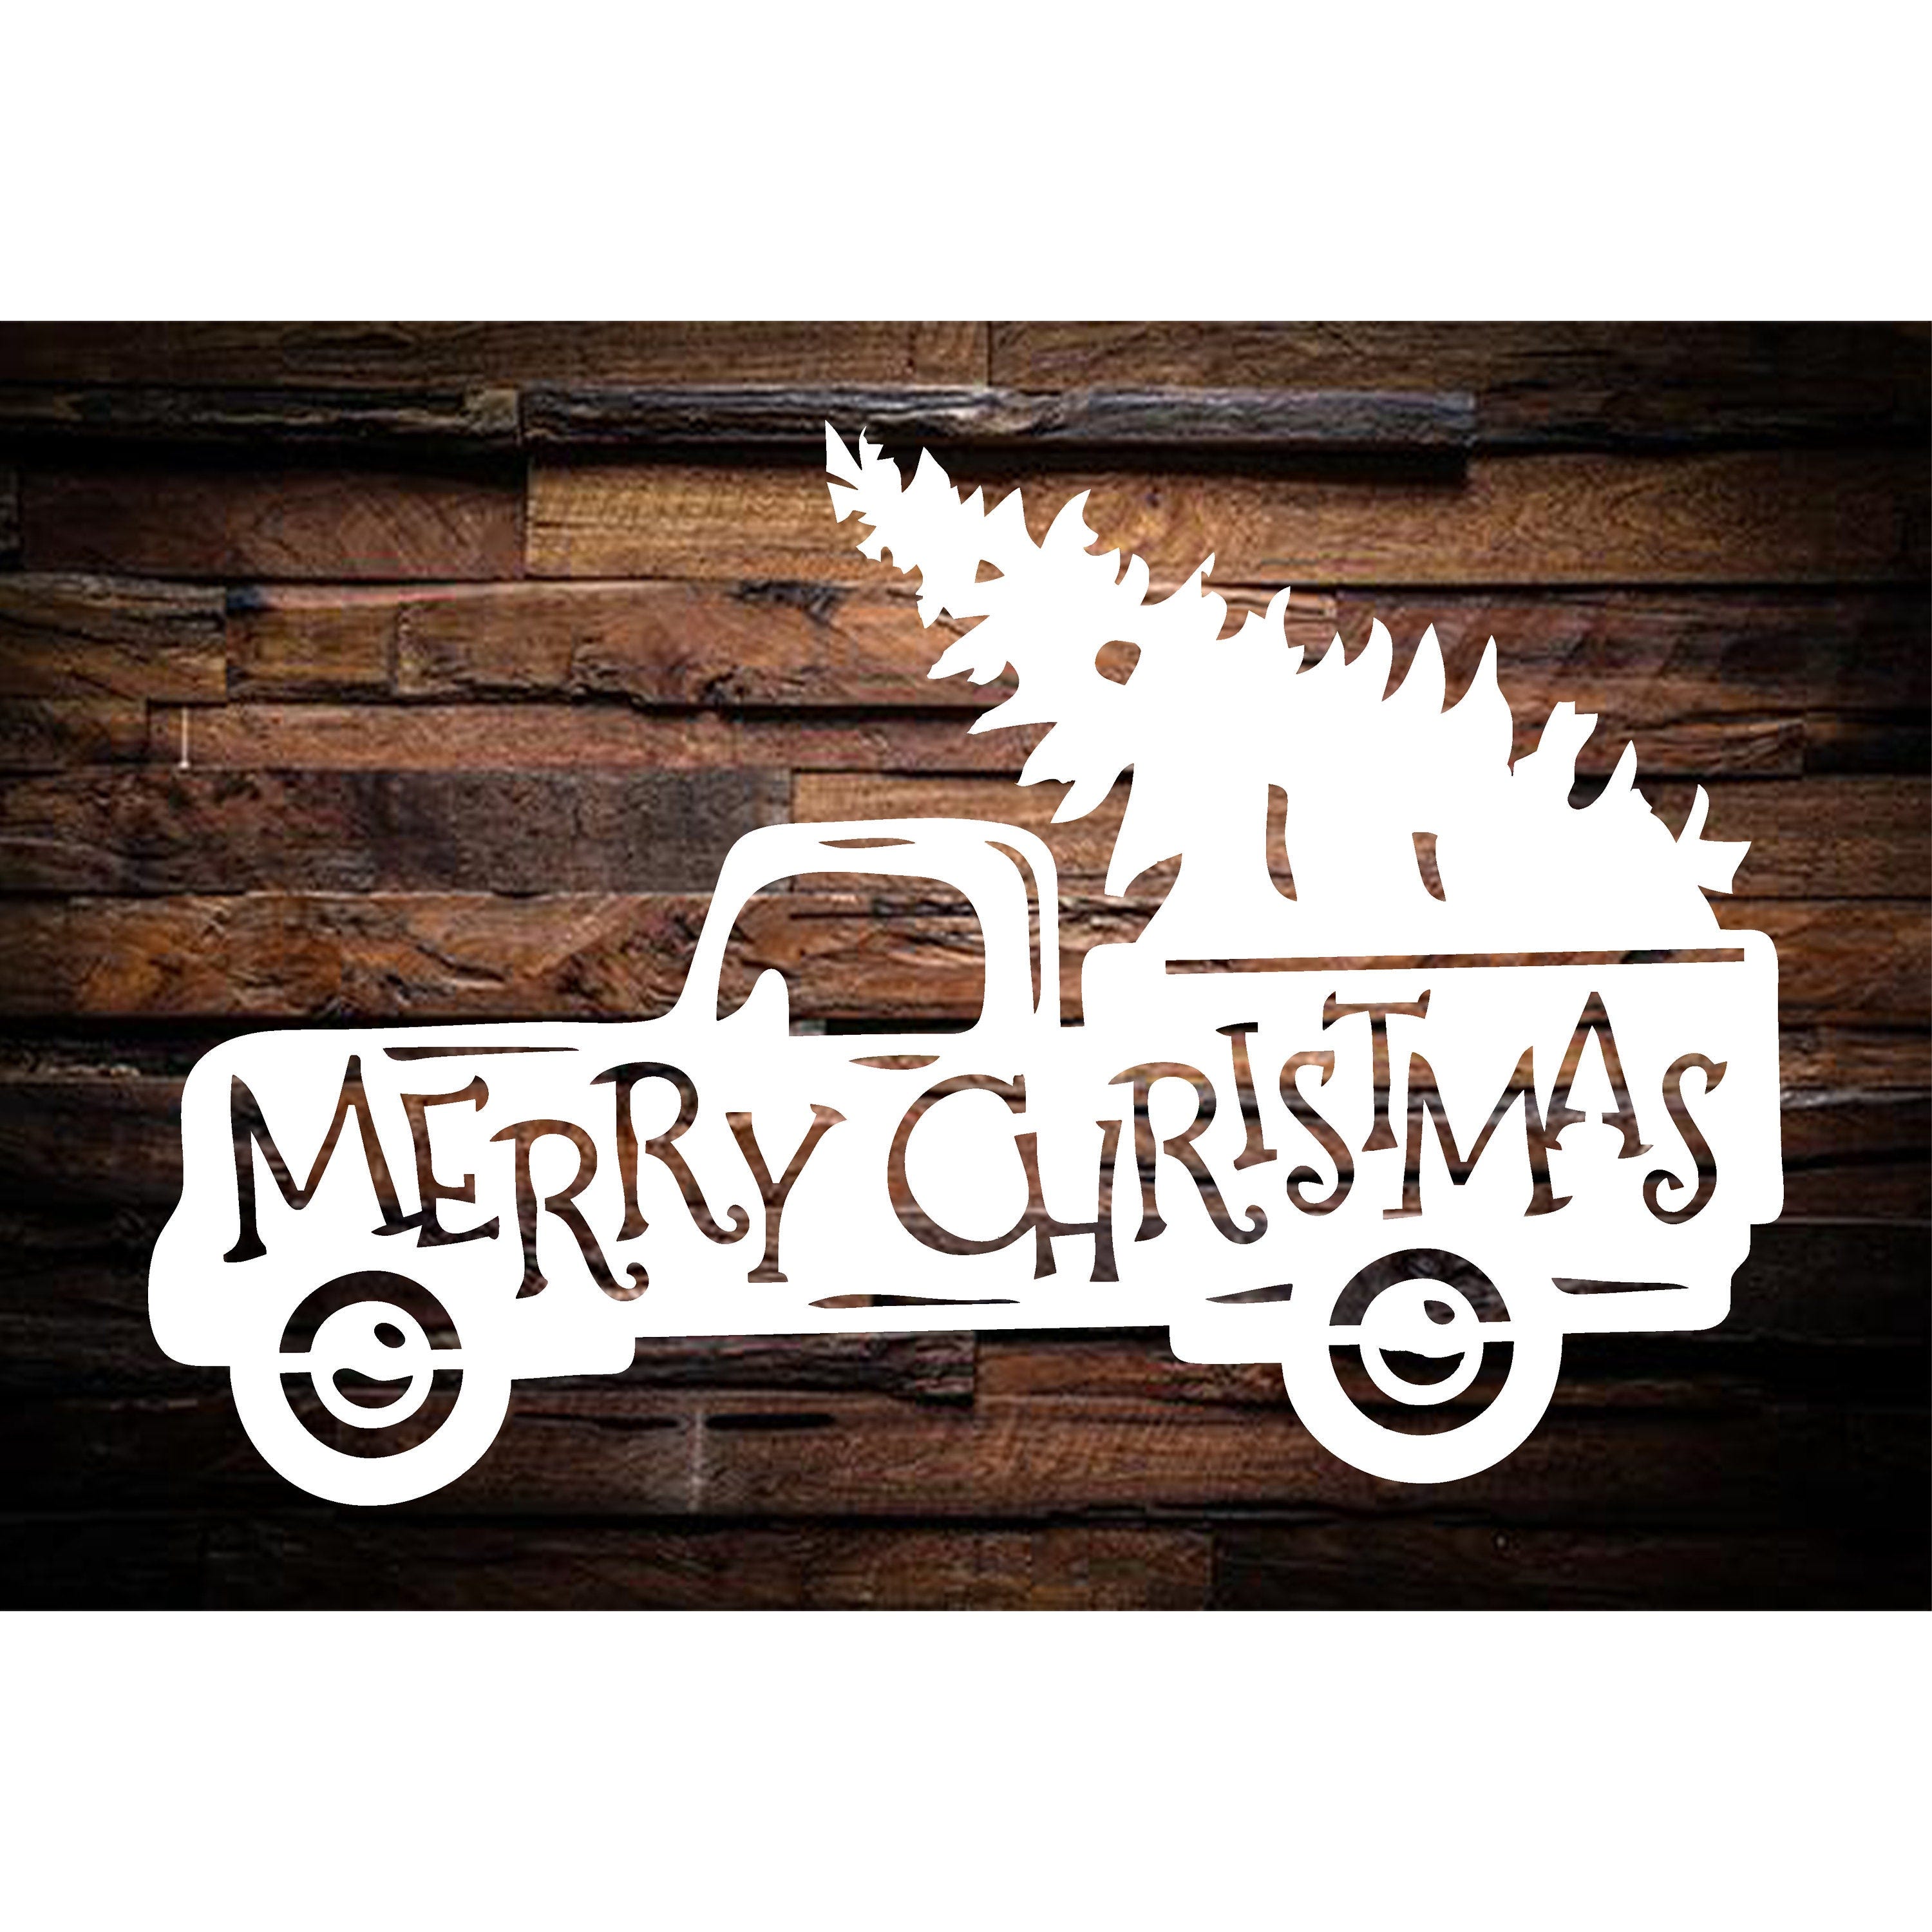 Merry Christmas Truck dxf